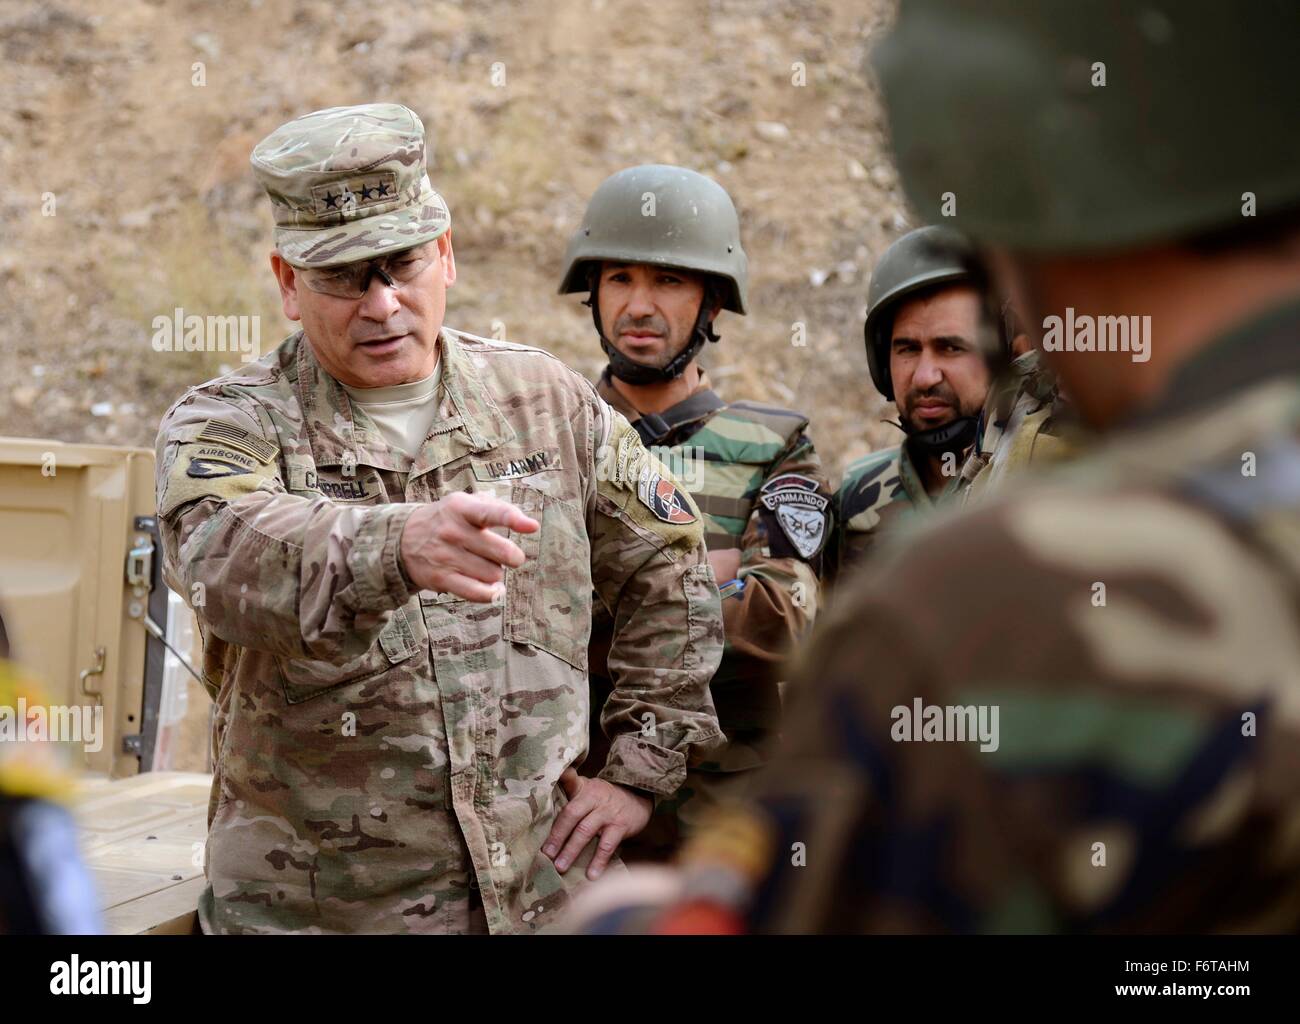 Kabul, Afghanistan. 19th November, 2015. Commander of U.S. Forces in Afghanistan Gen. John Campbell talks to Afghan National Army commandos after a training exercise demonstration at Camp Morehead November 19, 2015 in Kabul, Afghanistan. Stock Photo